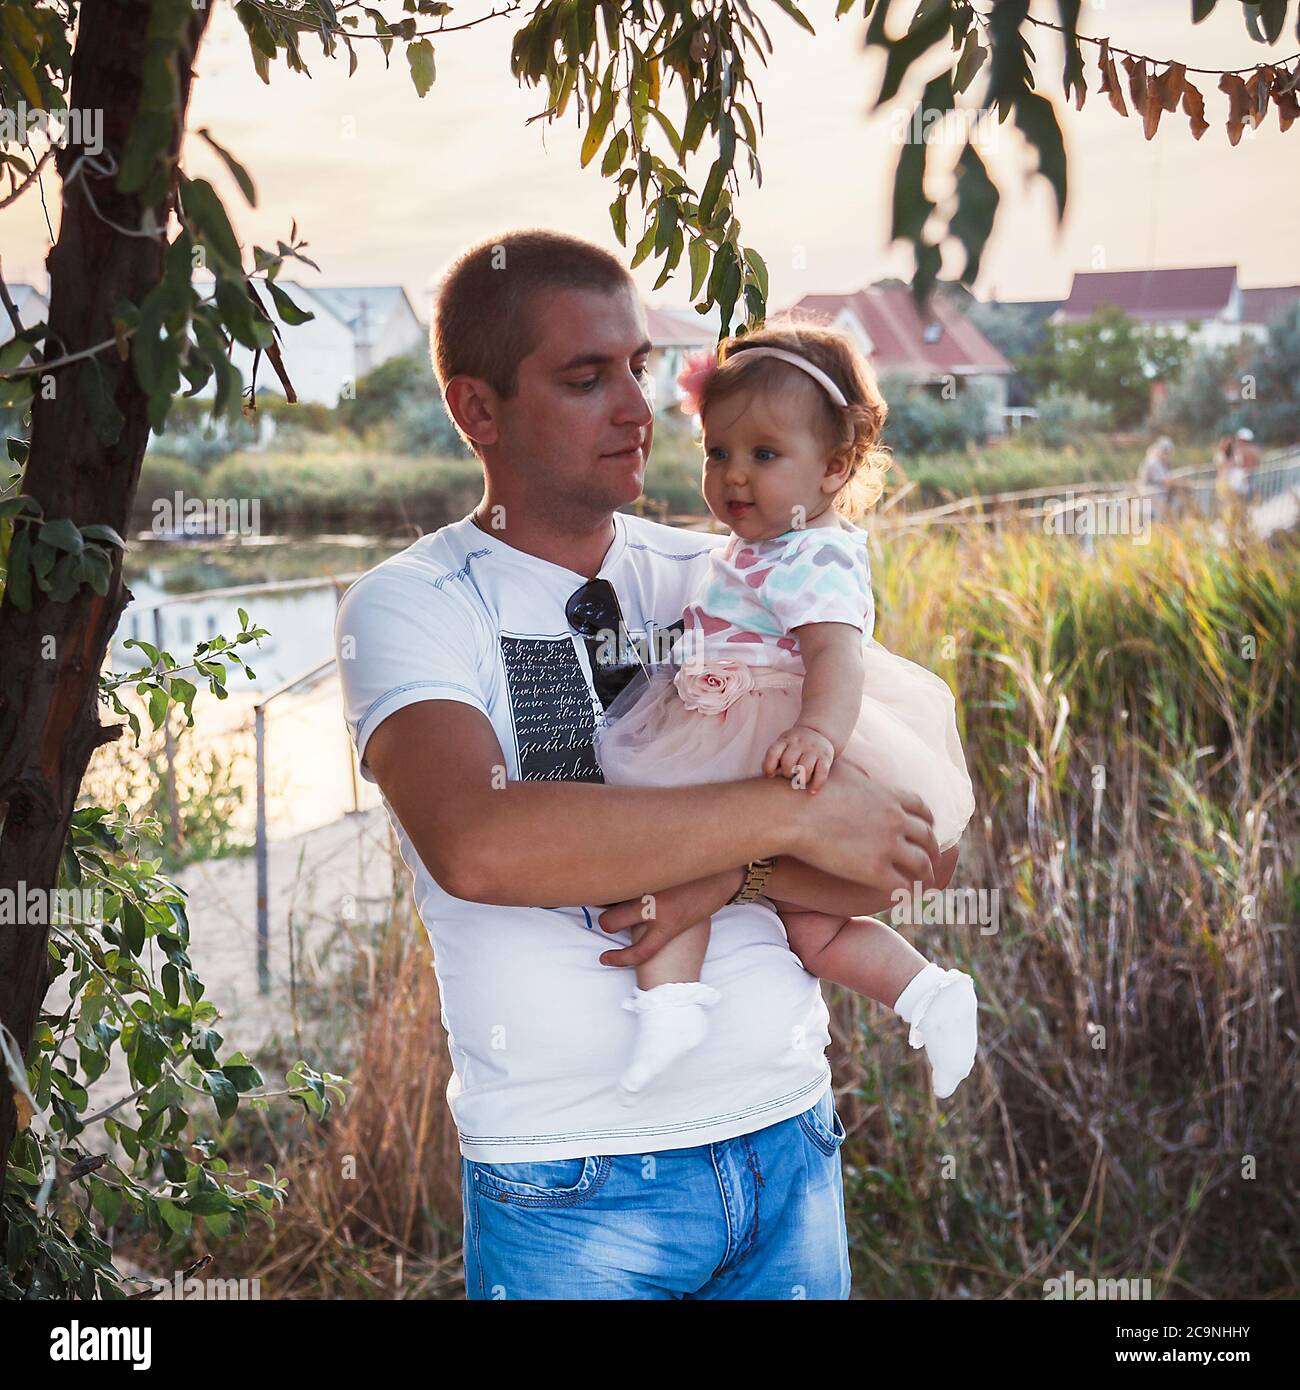 ODESSA, UKRAINE - SEPTEMBER 02, 2014: Young father holding his baby girl outside in the park Stock Photo